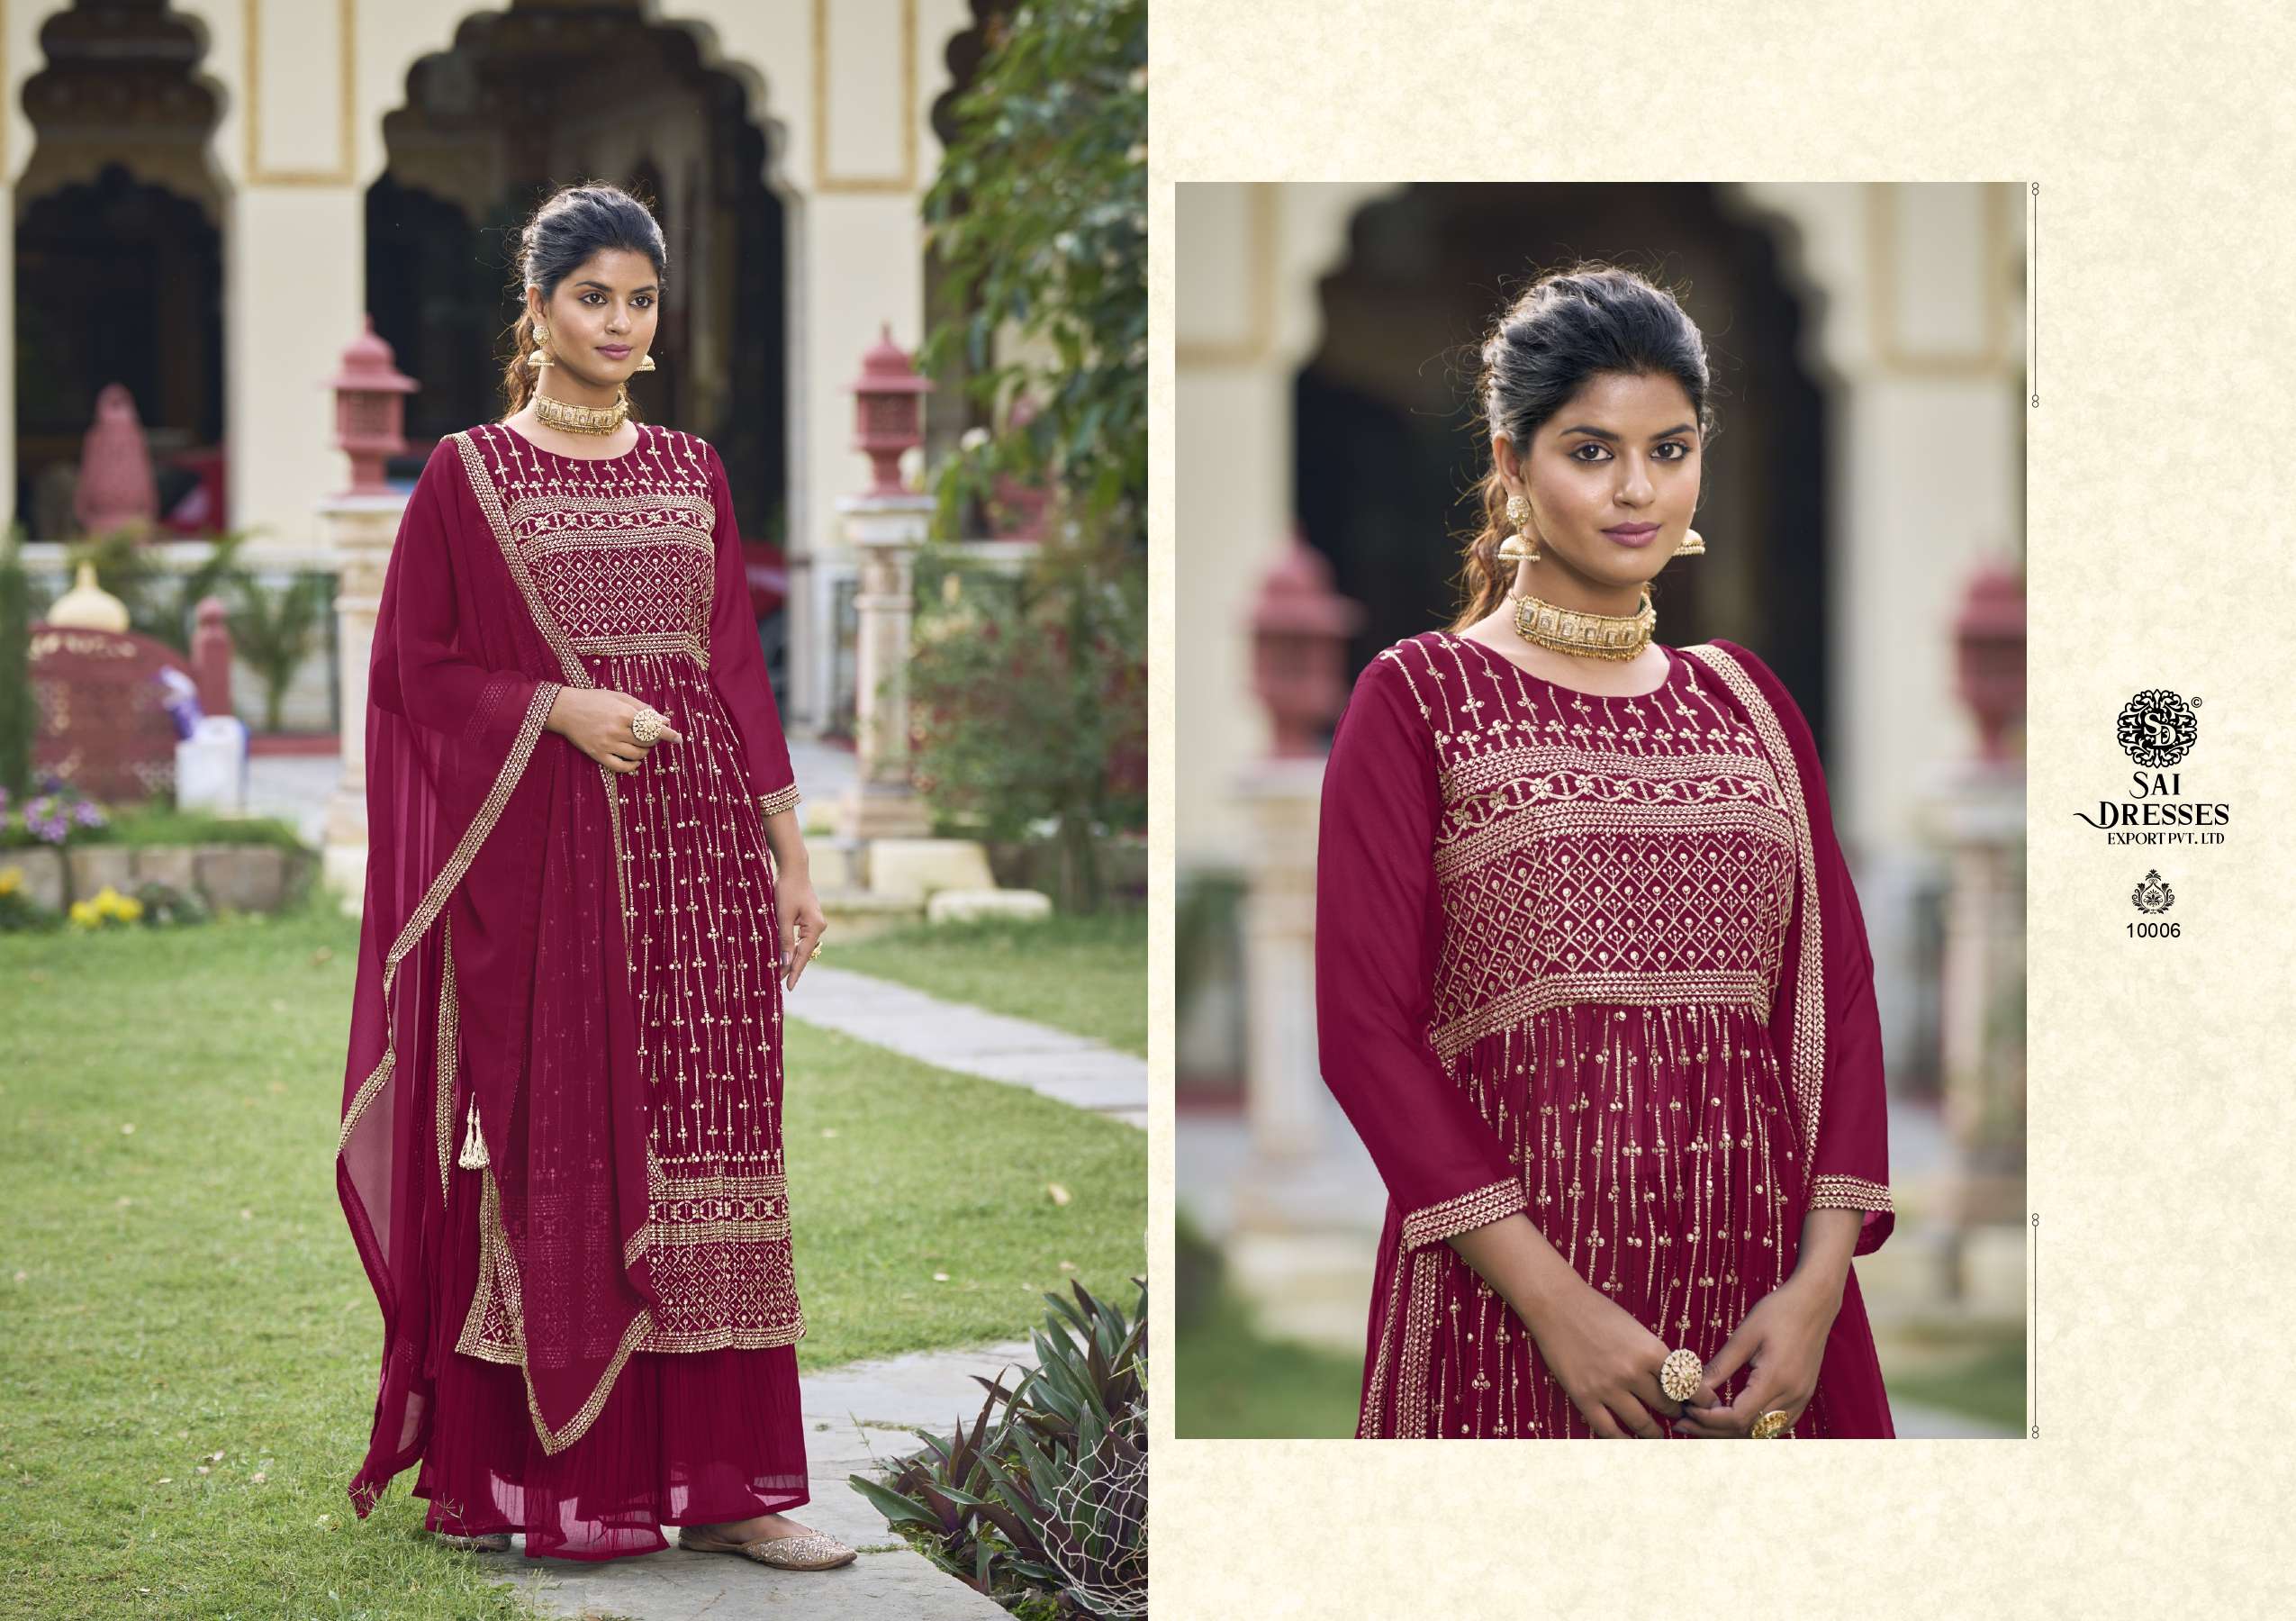 SAI DRESSES PRESENT AISHA READY TO WEAR NAYRA STYLE DESIGNER SUITS IN WHOLESALE RATE IN SURAT